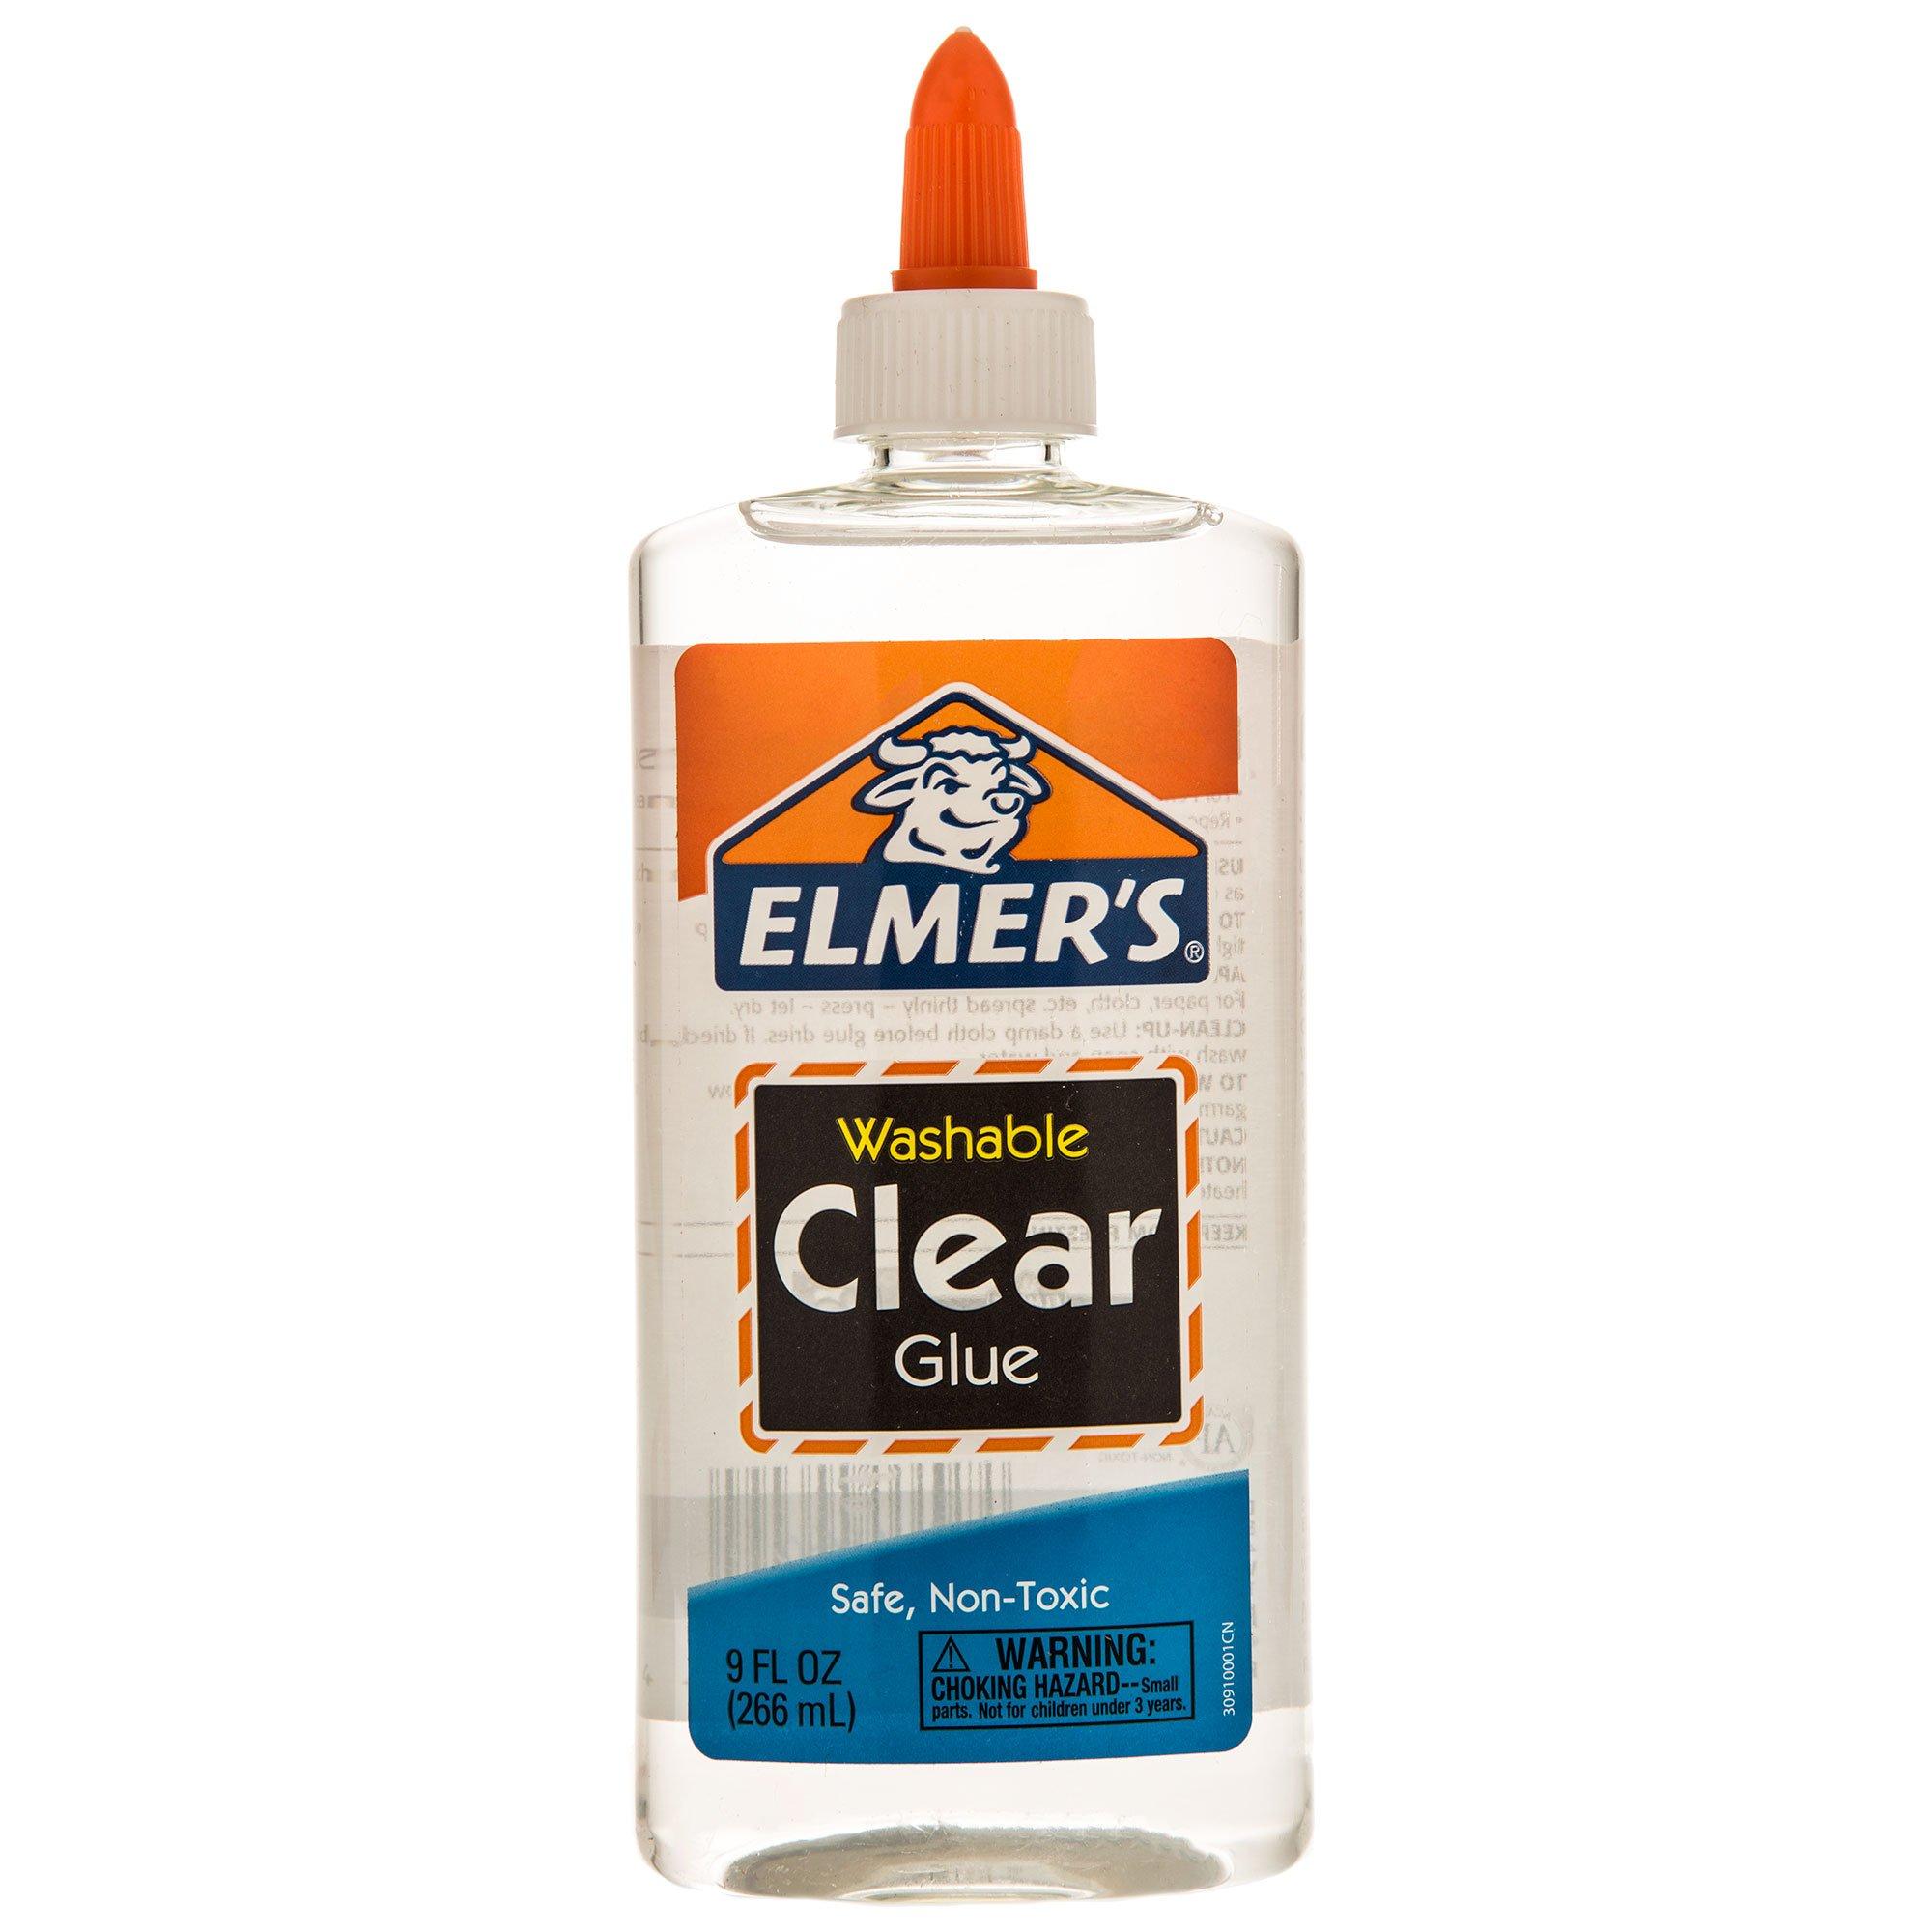  Elmers Disappearing Purple Washable Glue Bundle - School Glue  Sticks and Bottles : Arts, Crafts & Sewing